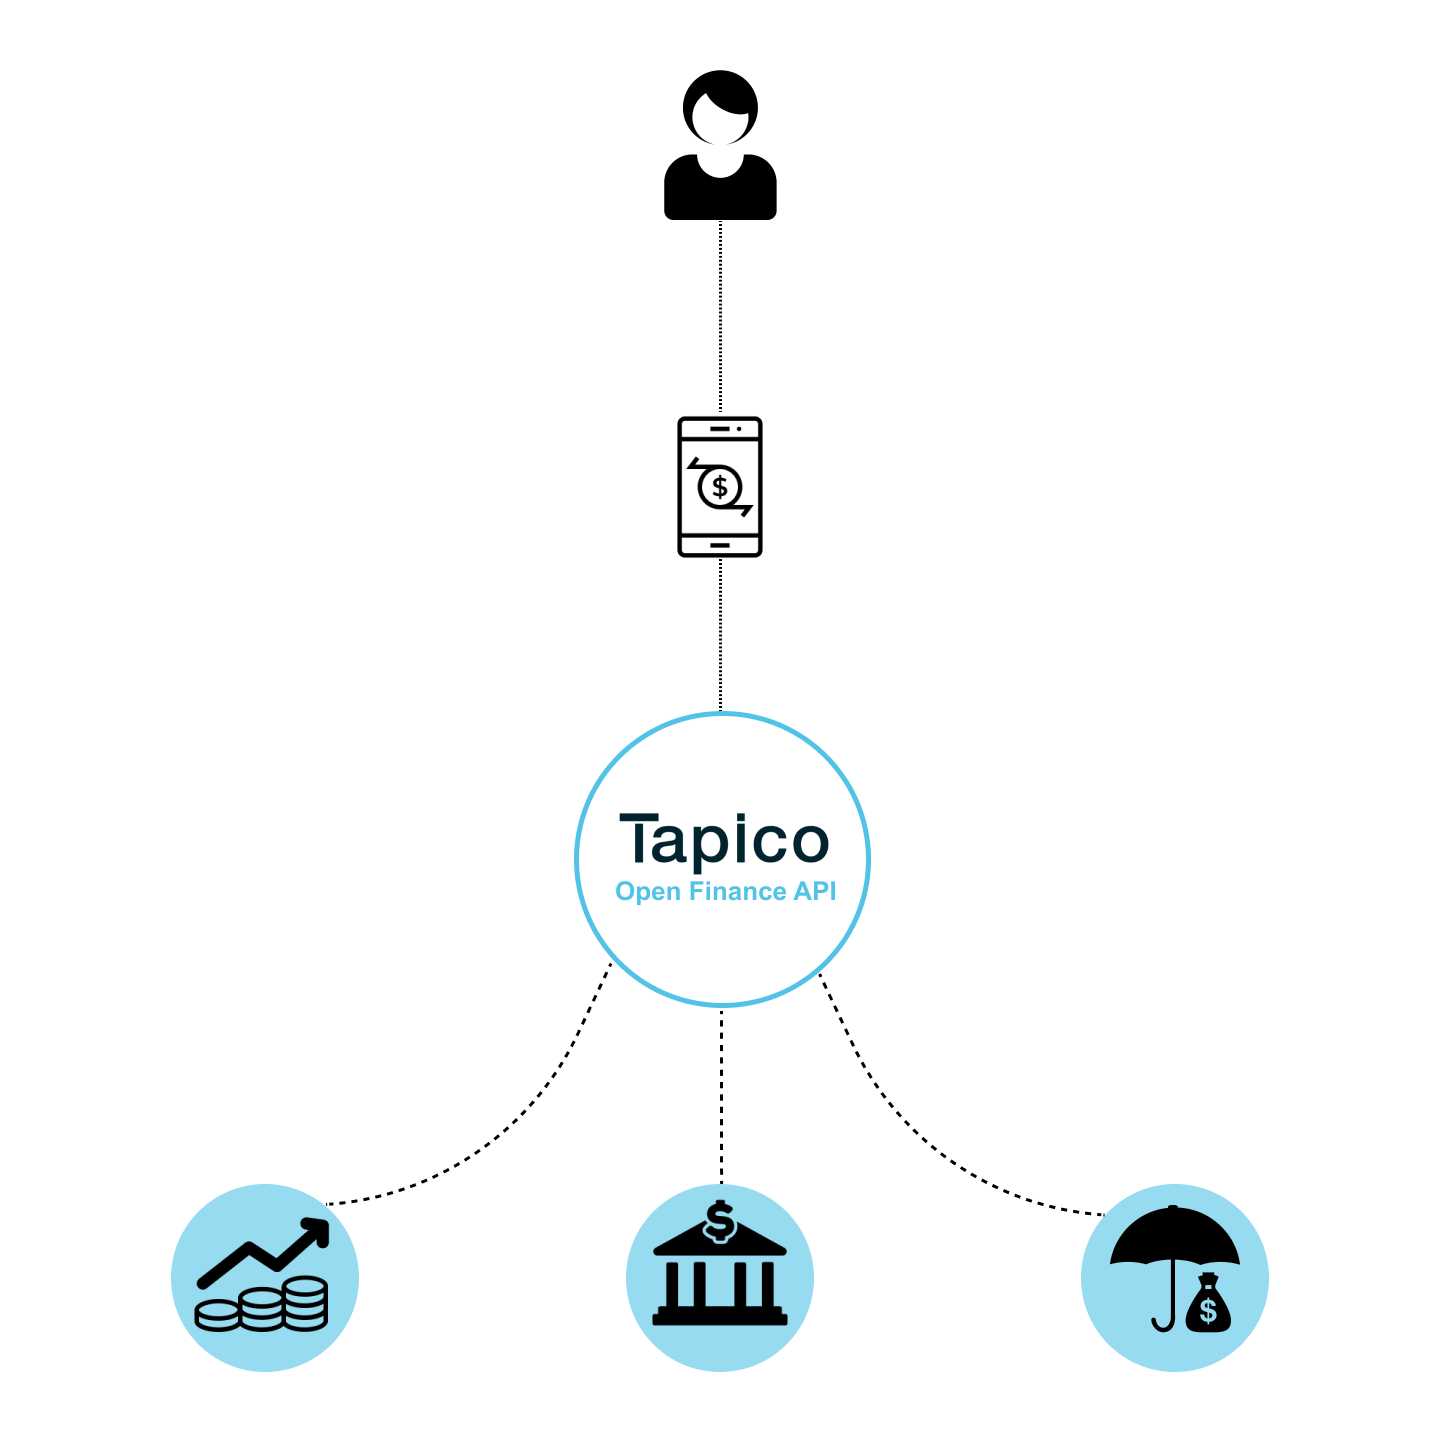 Tapico's Open Finance API is the single integration point for your Application for Wealth & Banking data.